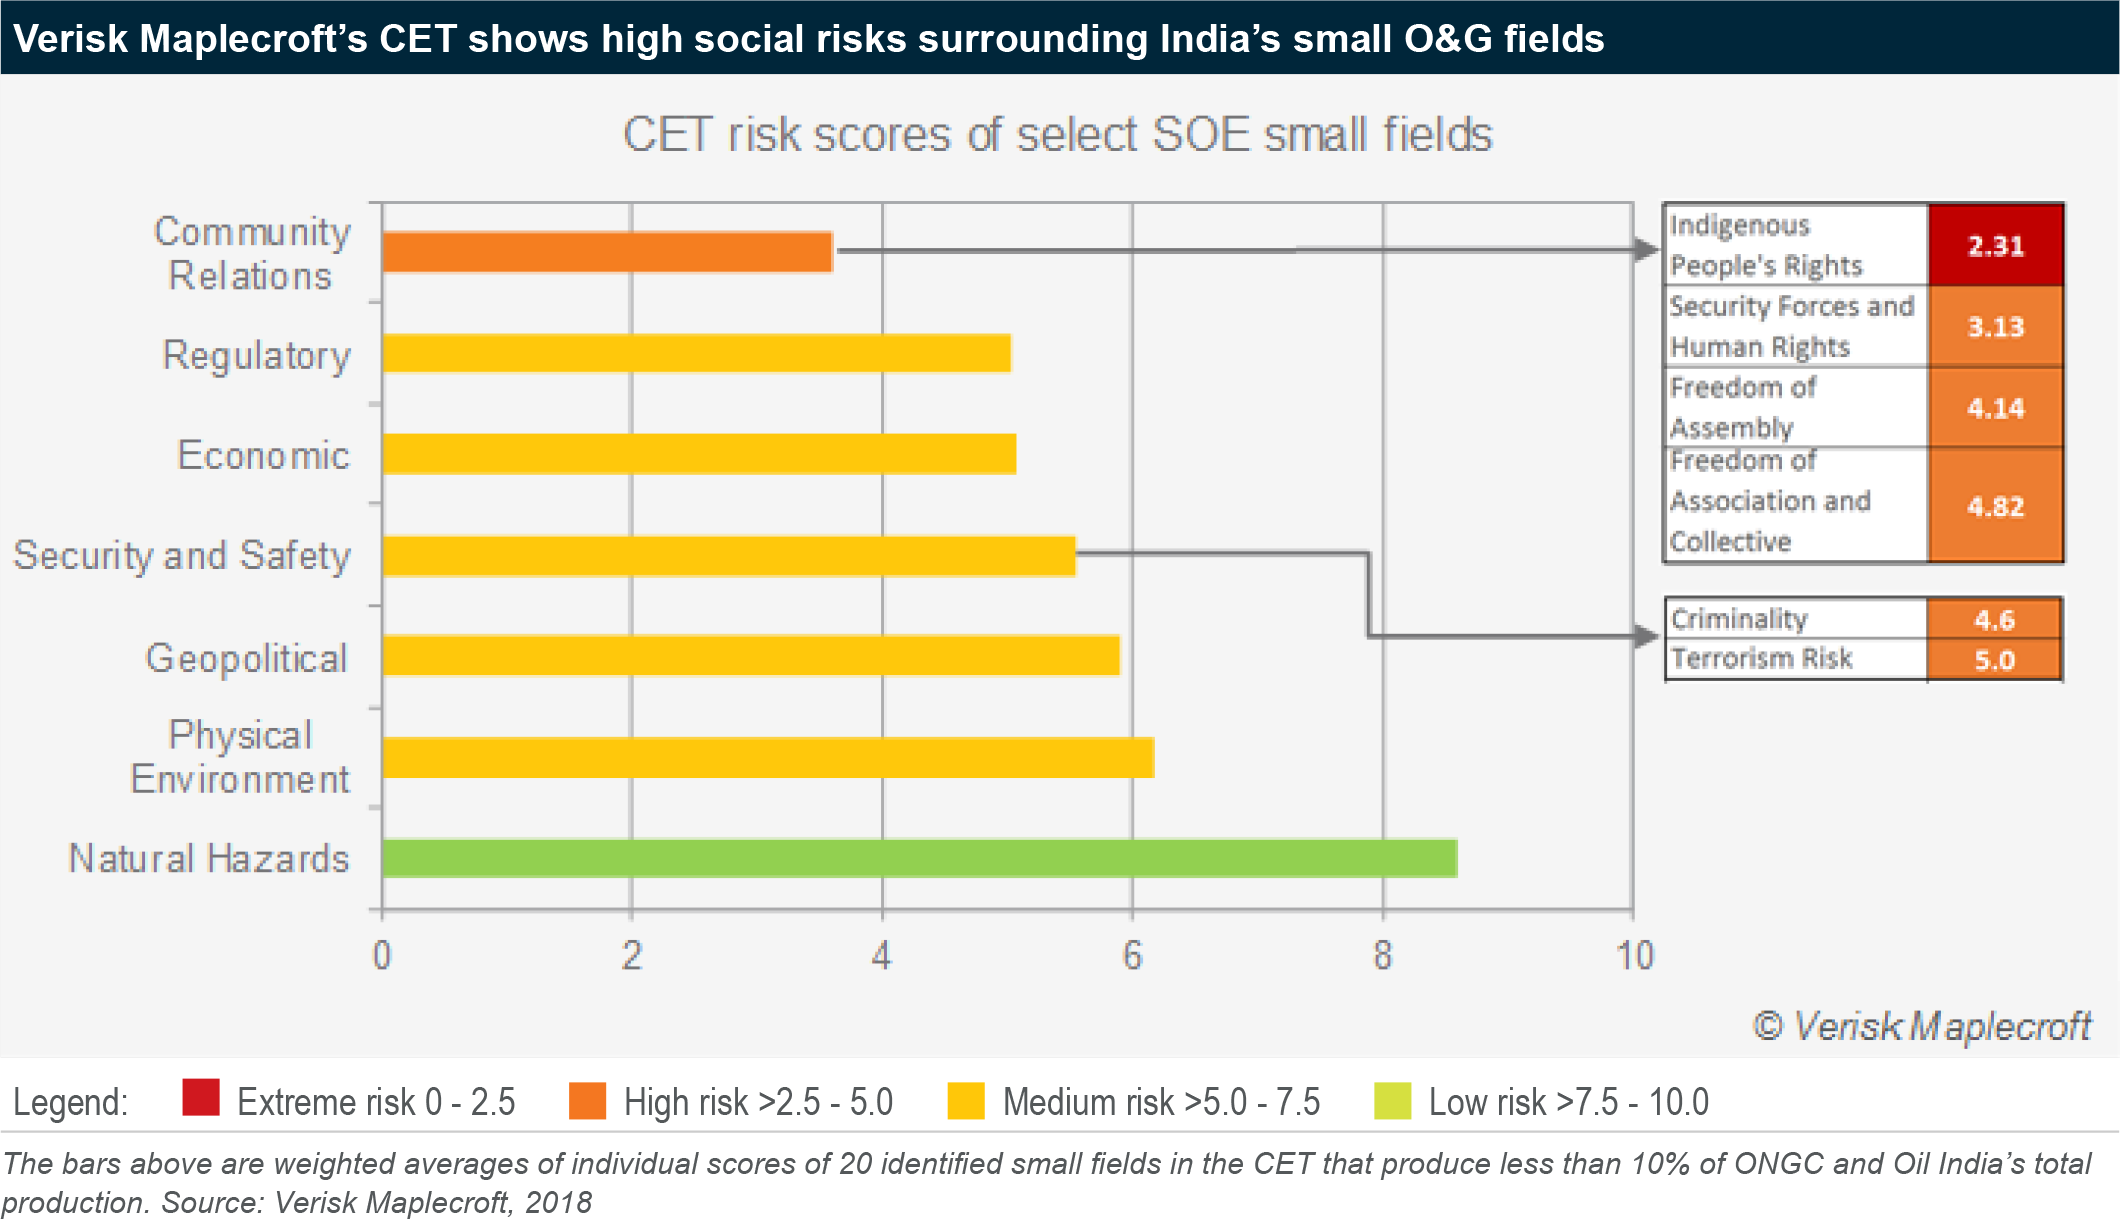 High social risks surround India's small oil and gas fields